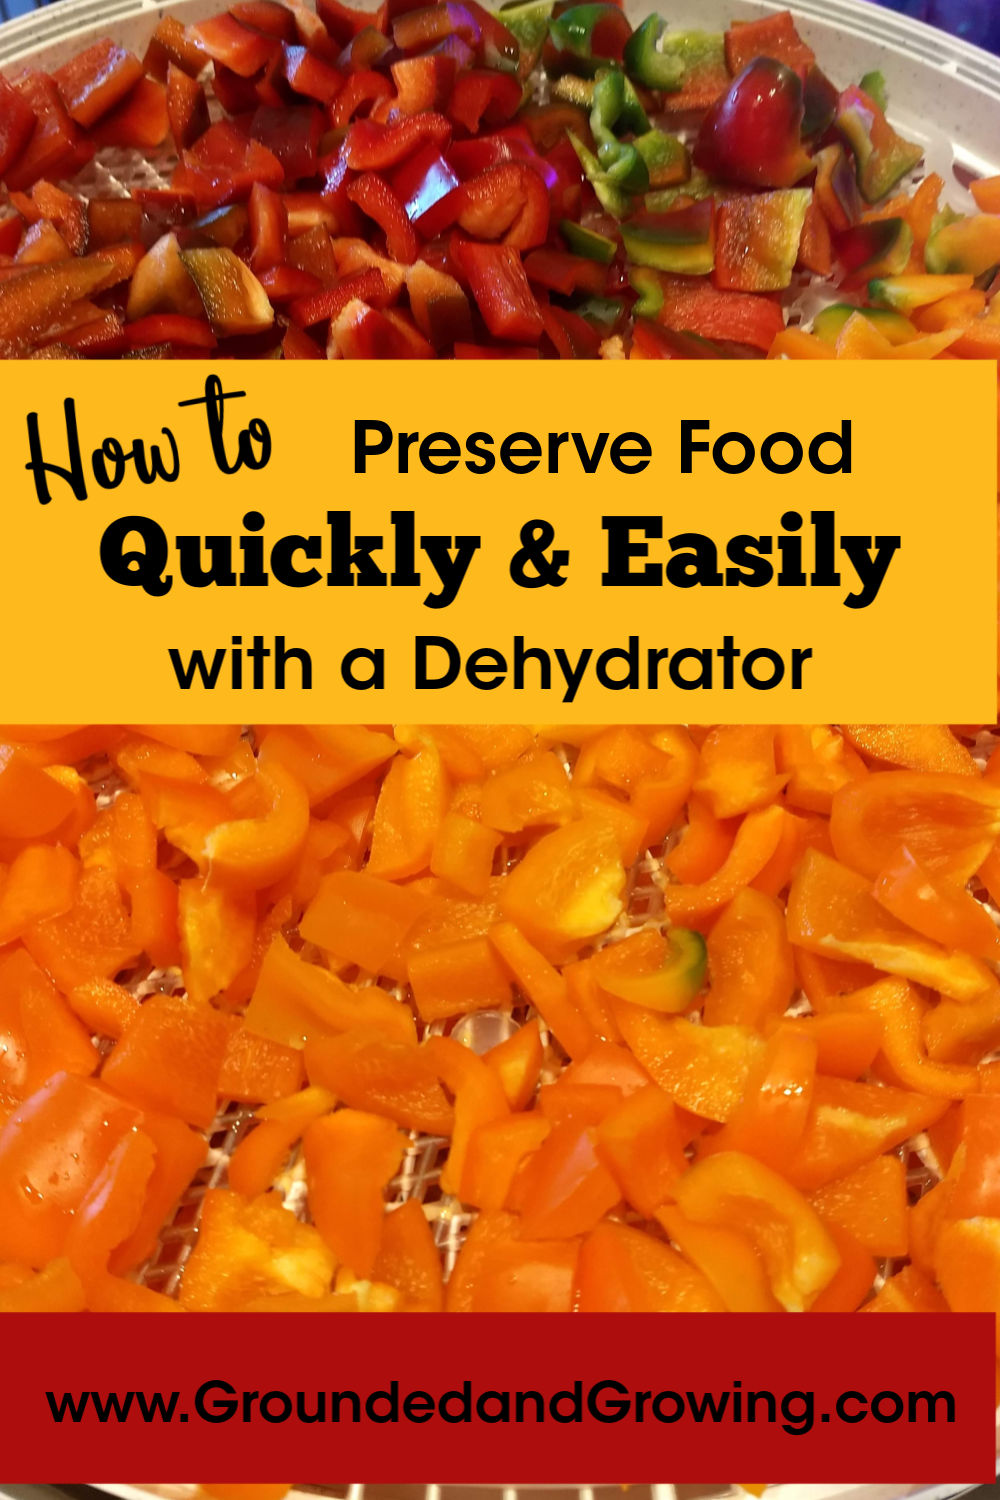 Mary Bell's Complete Dehydrator Cookbook 